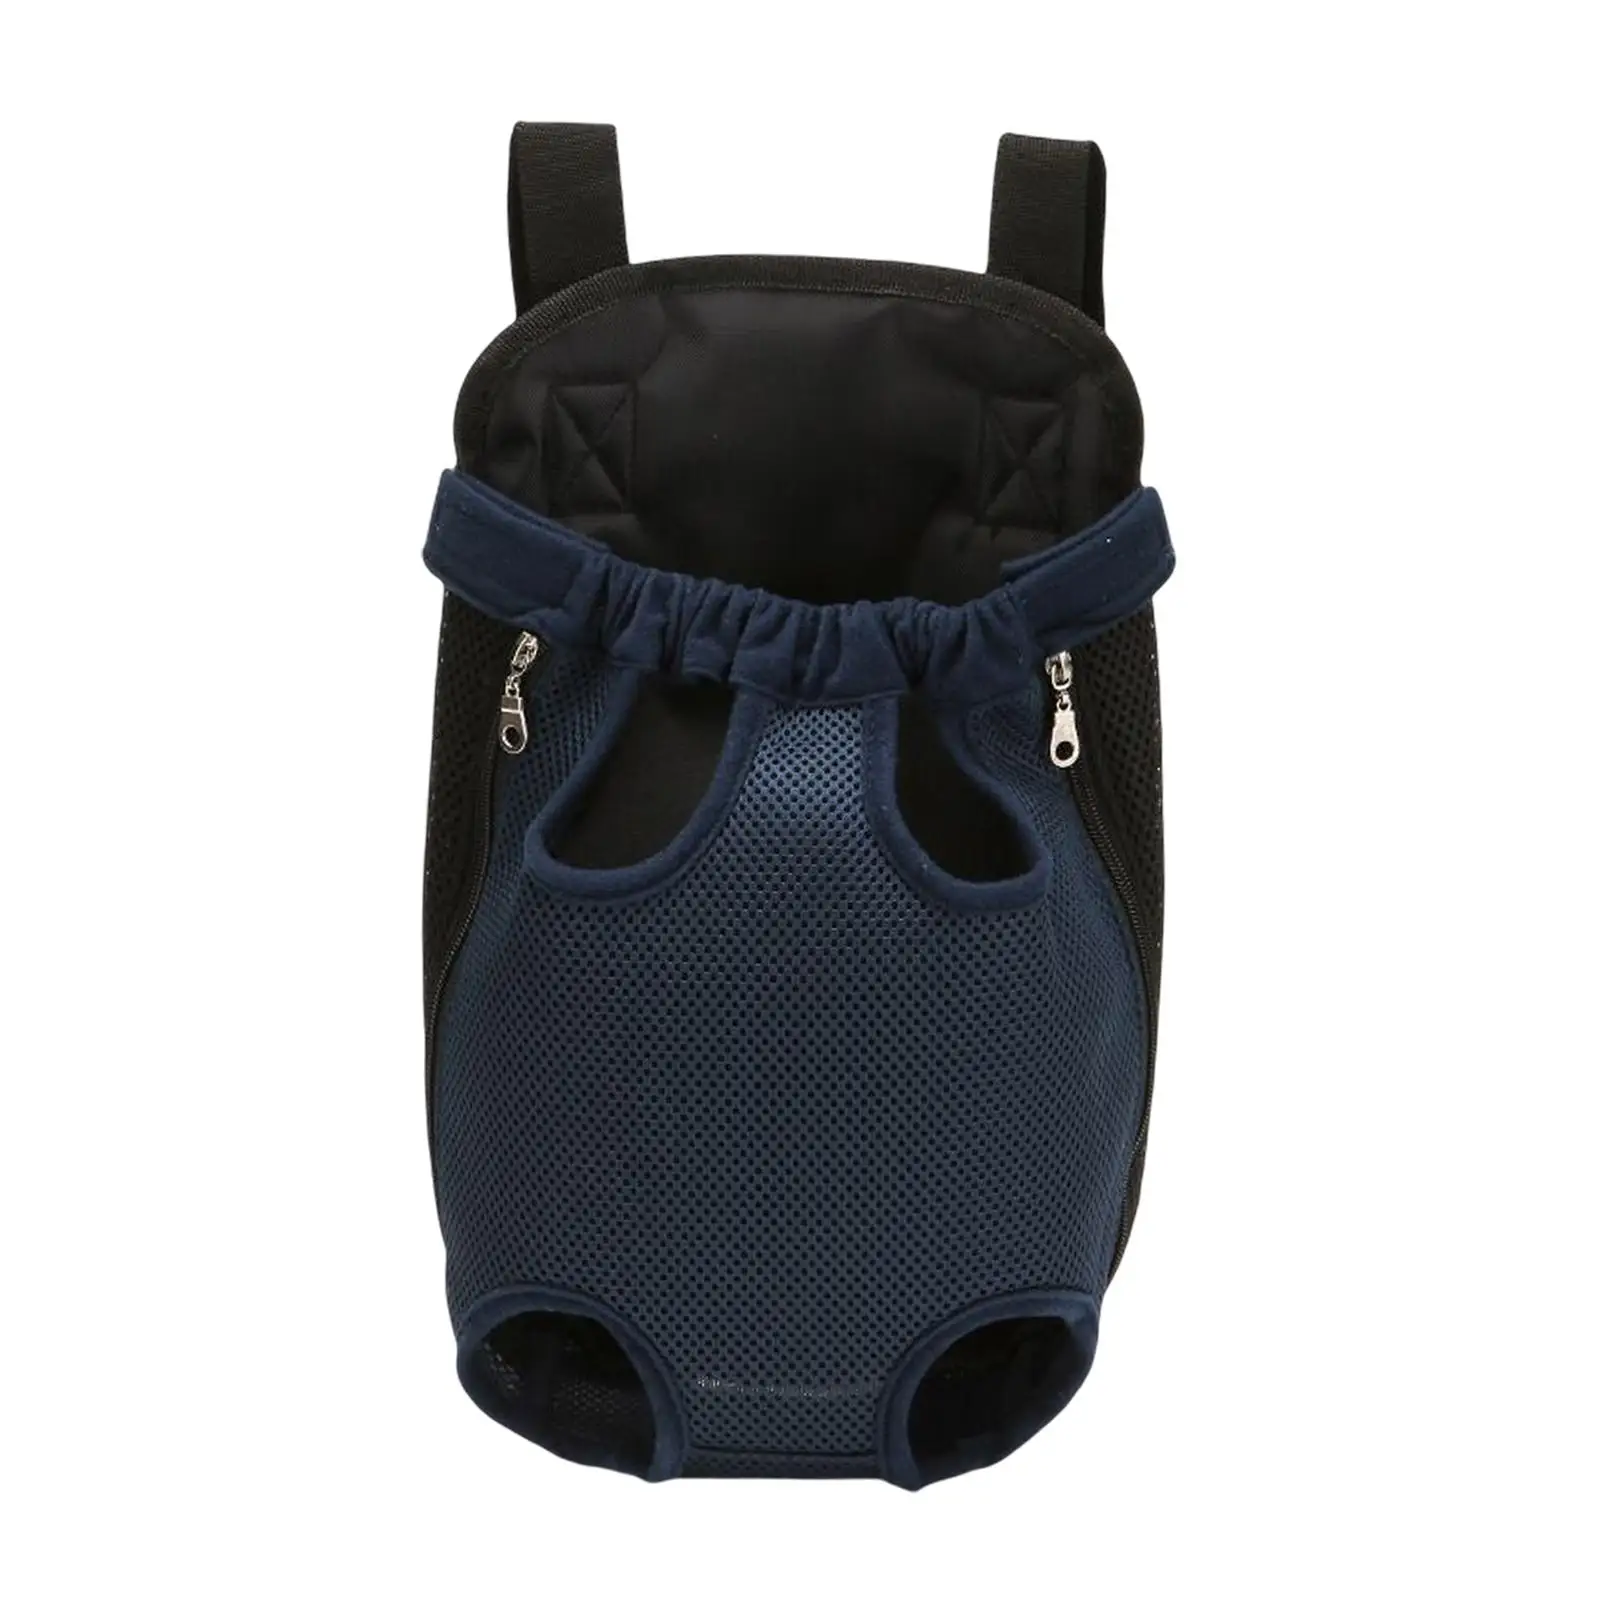 Pet Carrier Backpack, Hands Wide Shoulder Straps Legs Facing Travel Bag for Small Dogs Yorkie Traveling Walking Hiking